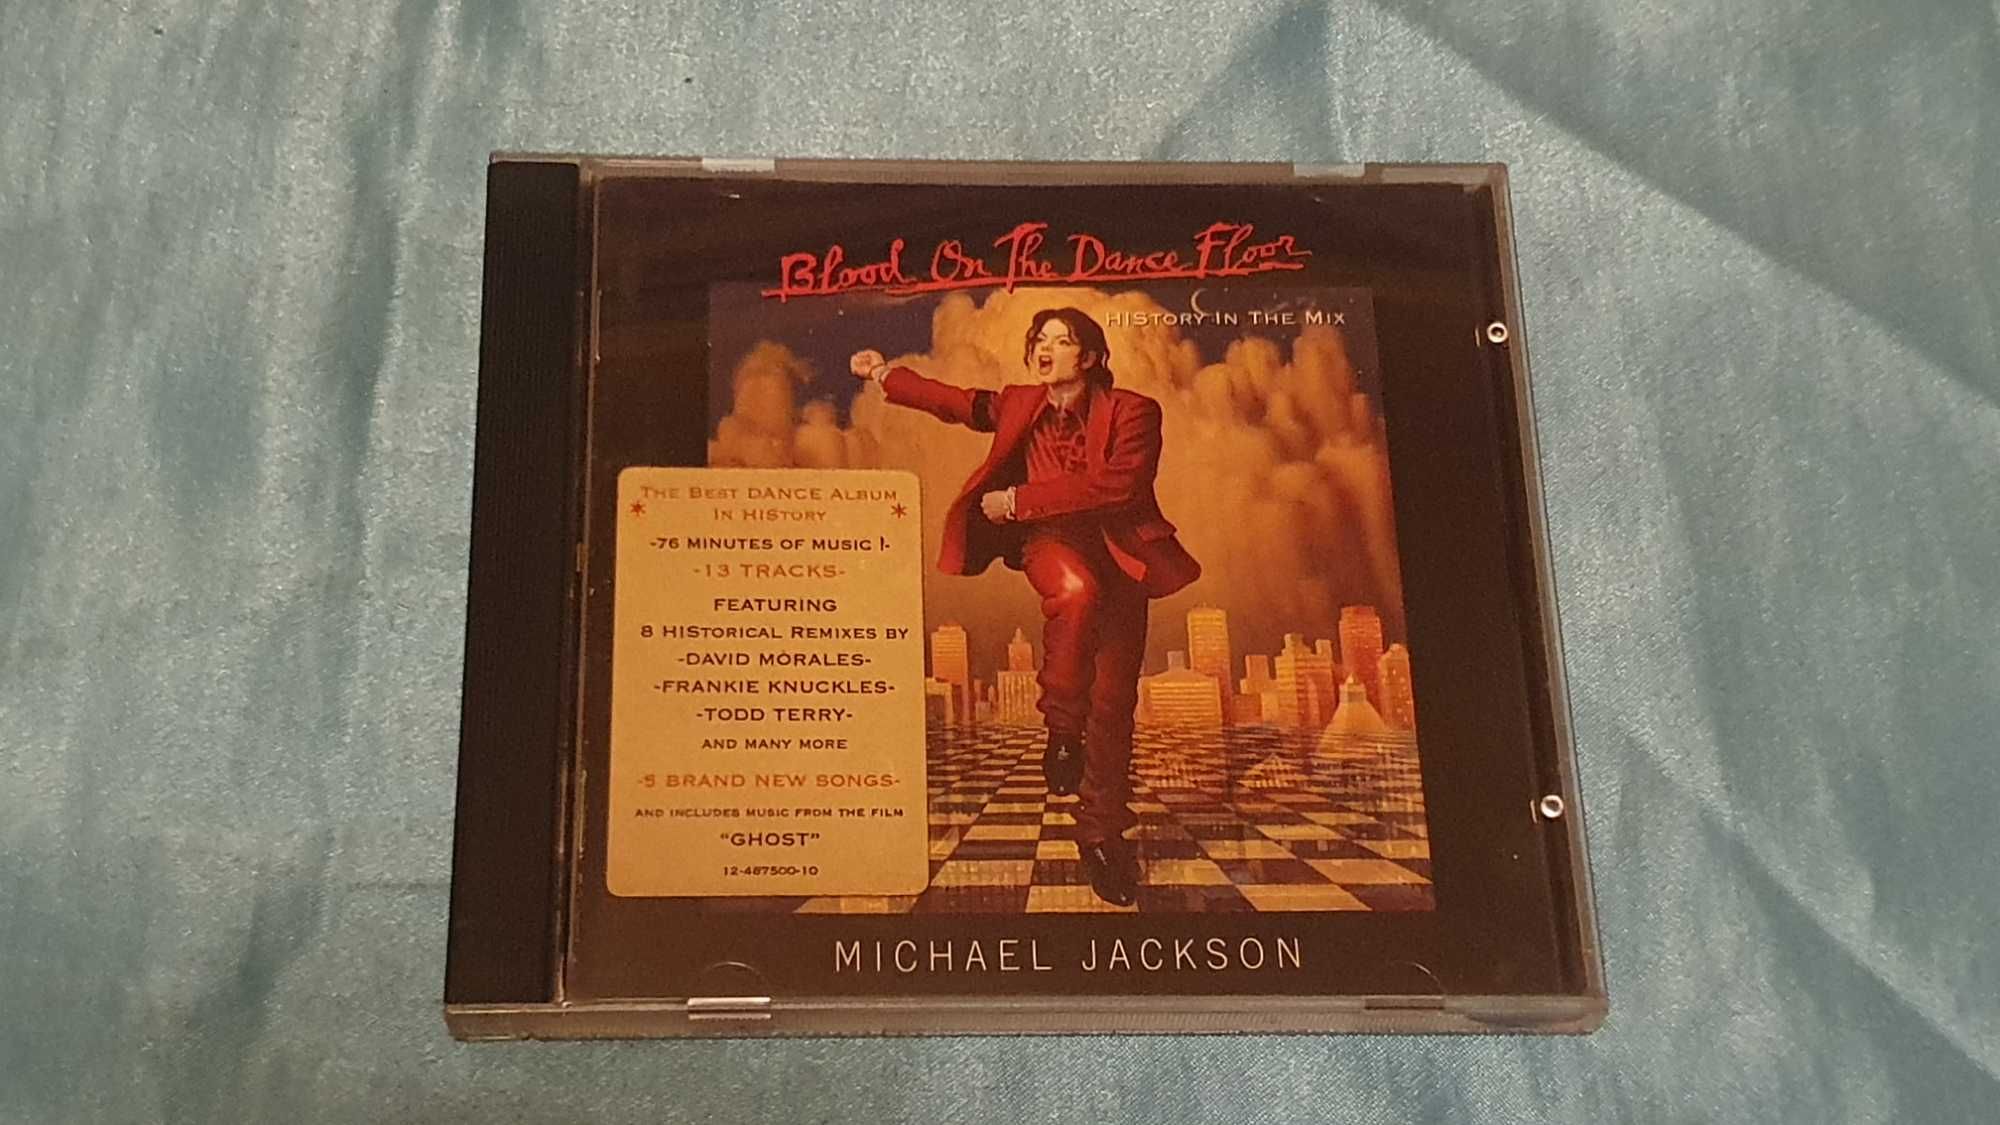 Michael Jackson - Blood on the Dance Floor: History in the Mix  CD